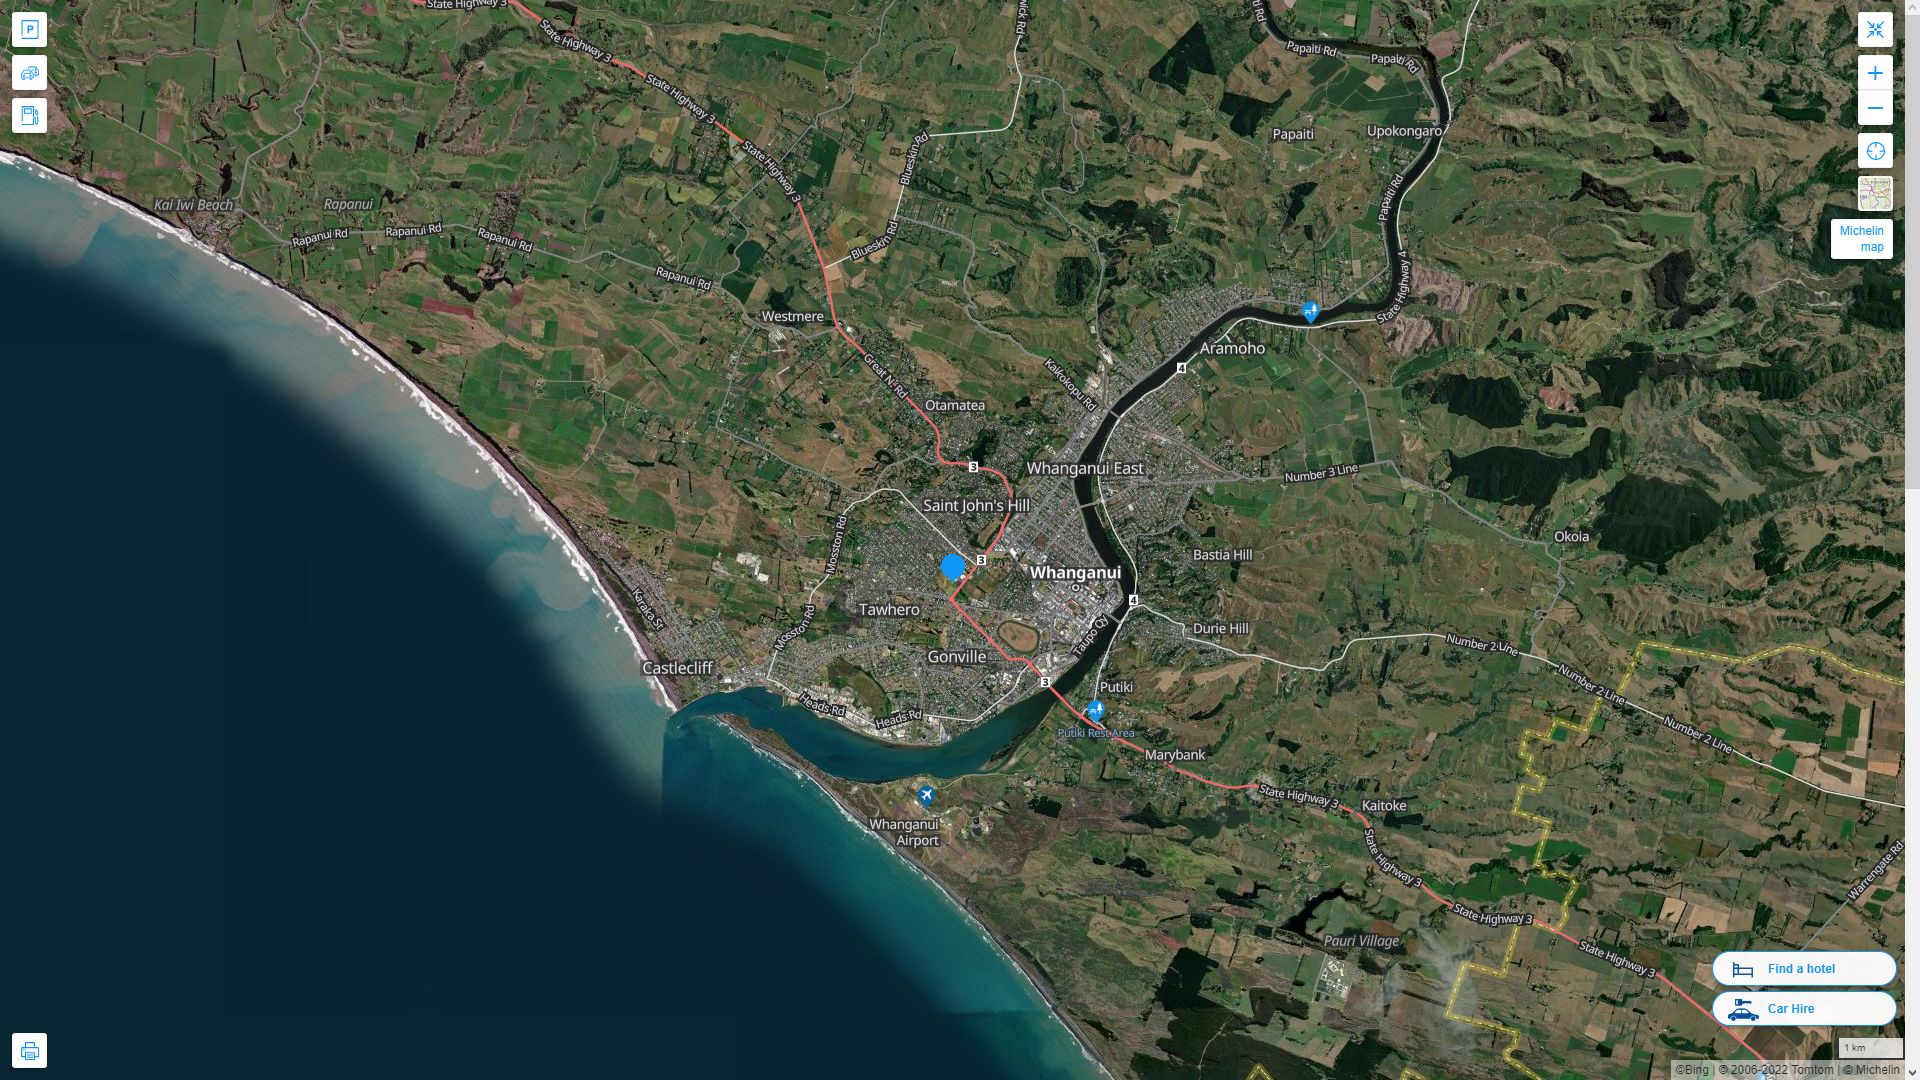 	Whanganui	 Highway and Road Map with Satellite View